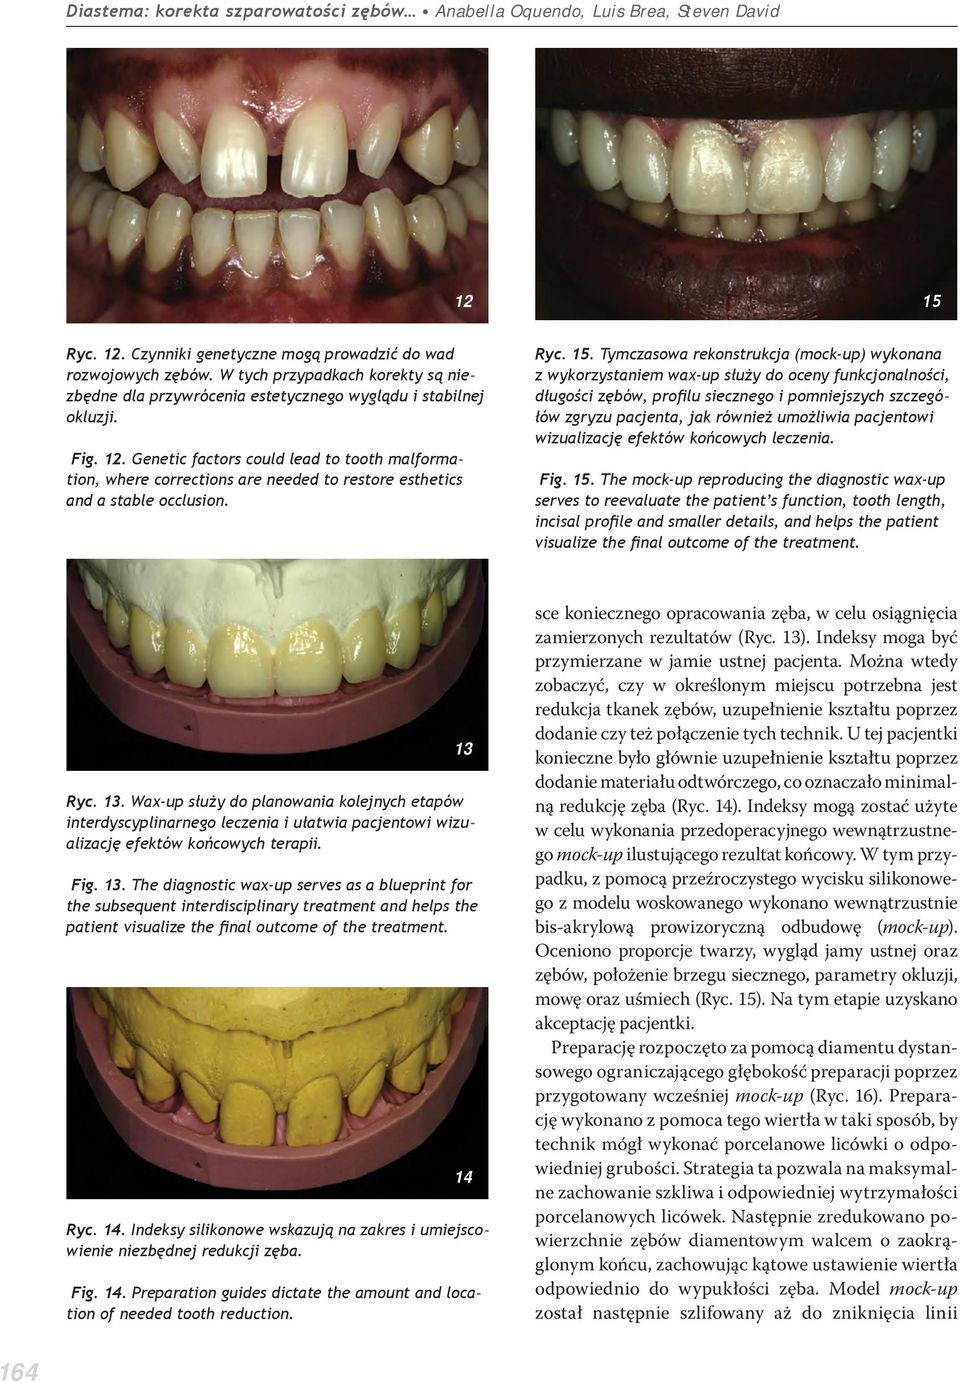 Genetic factors could lead to tooth malformation, where corrections are needed to restore esthetics and a stable occlusion. Ryc. 15.